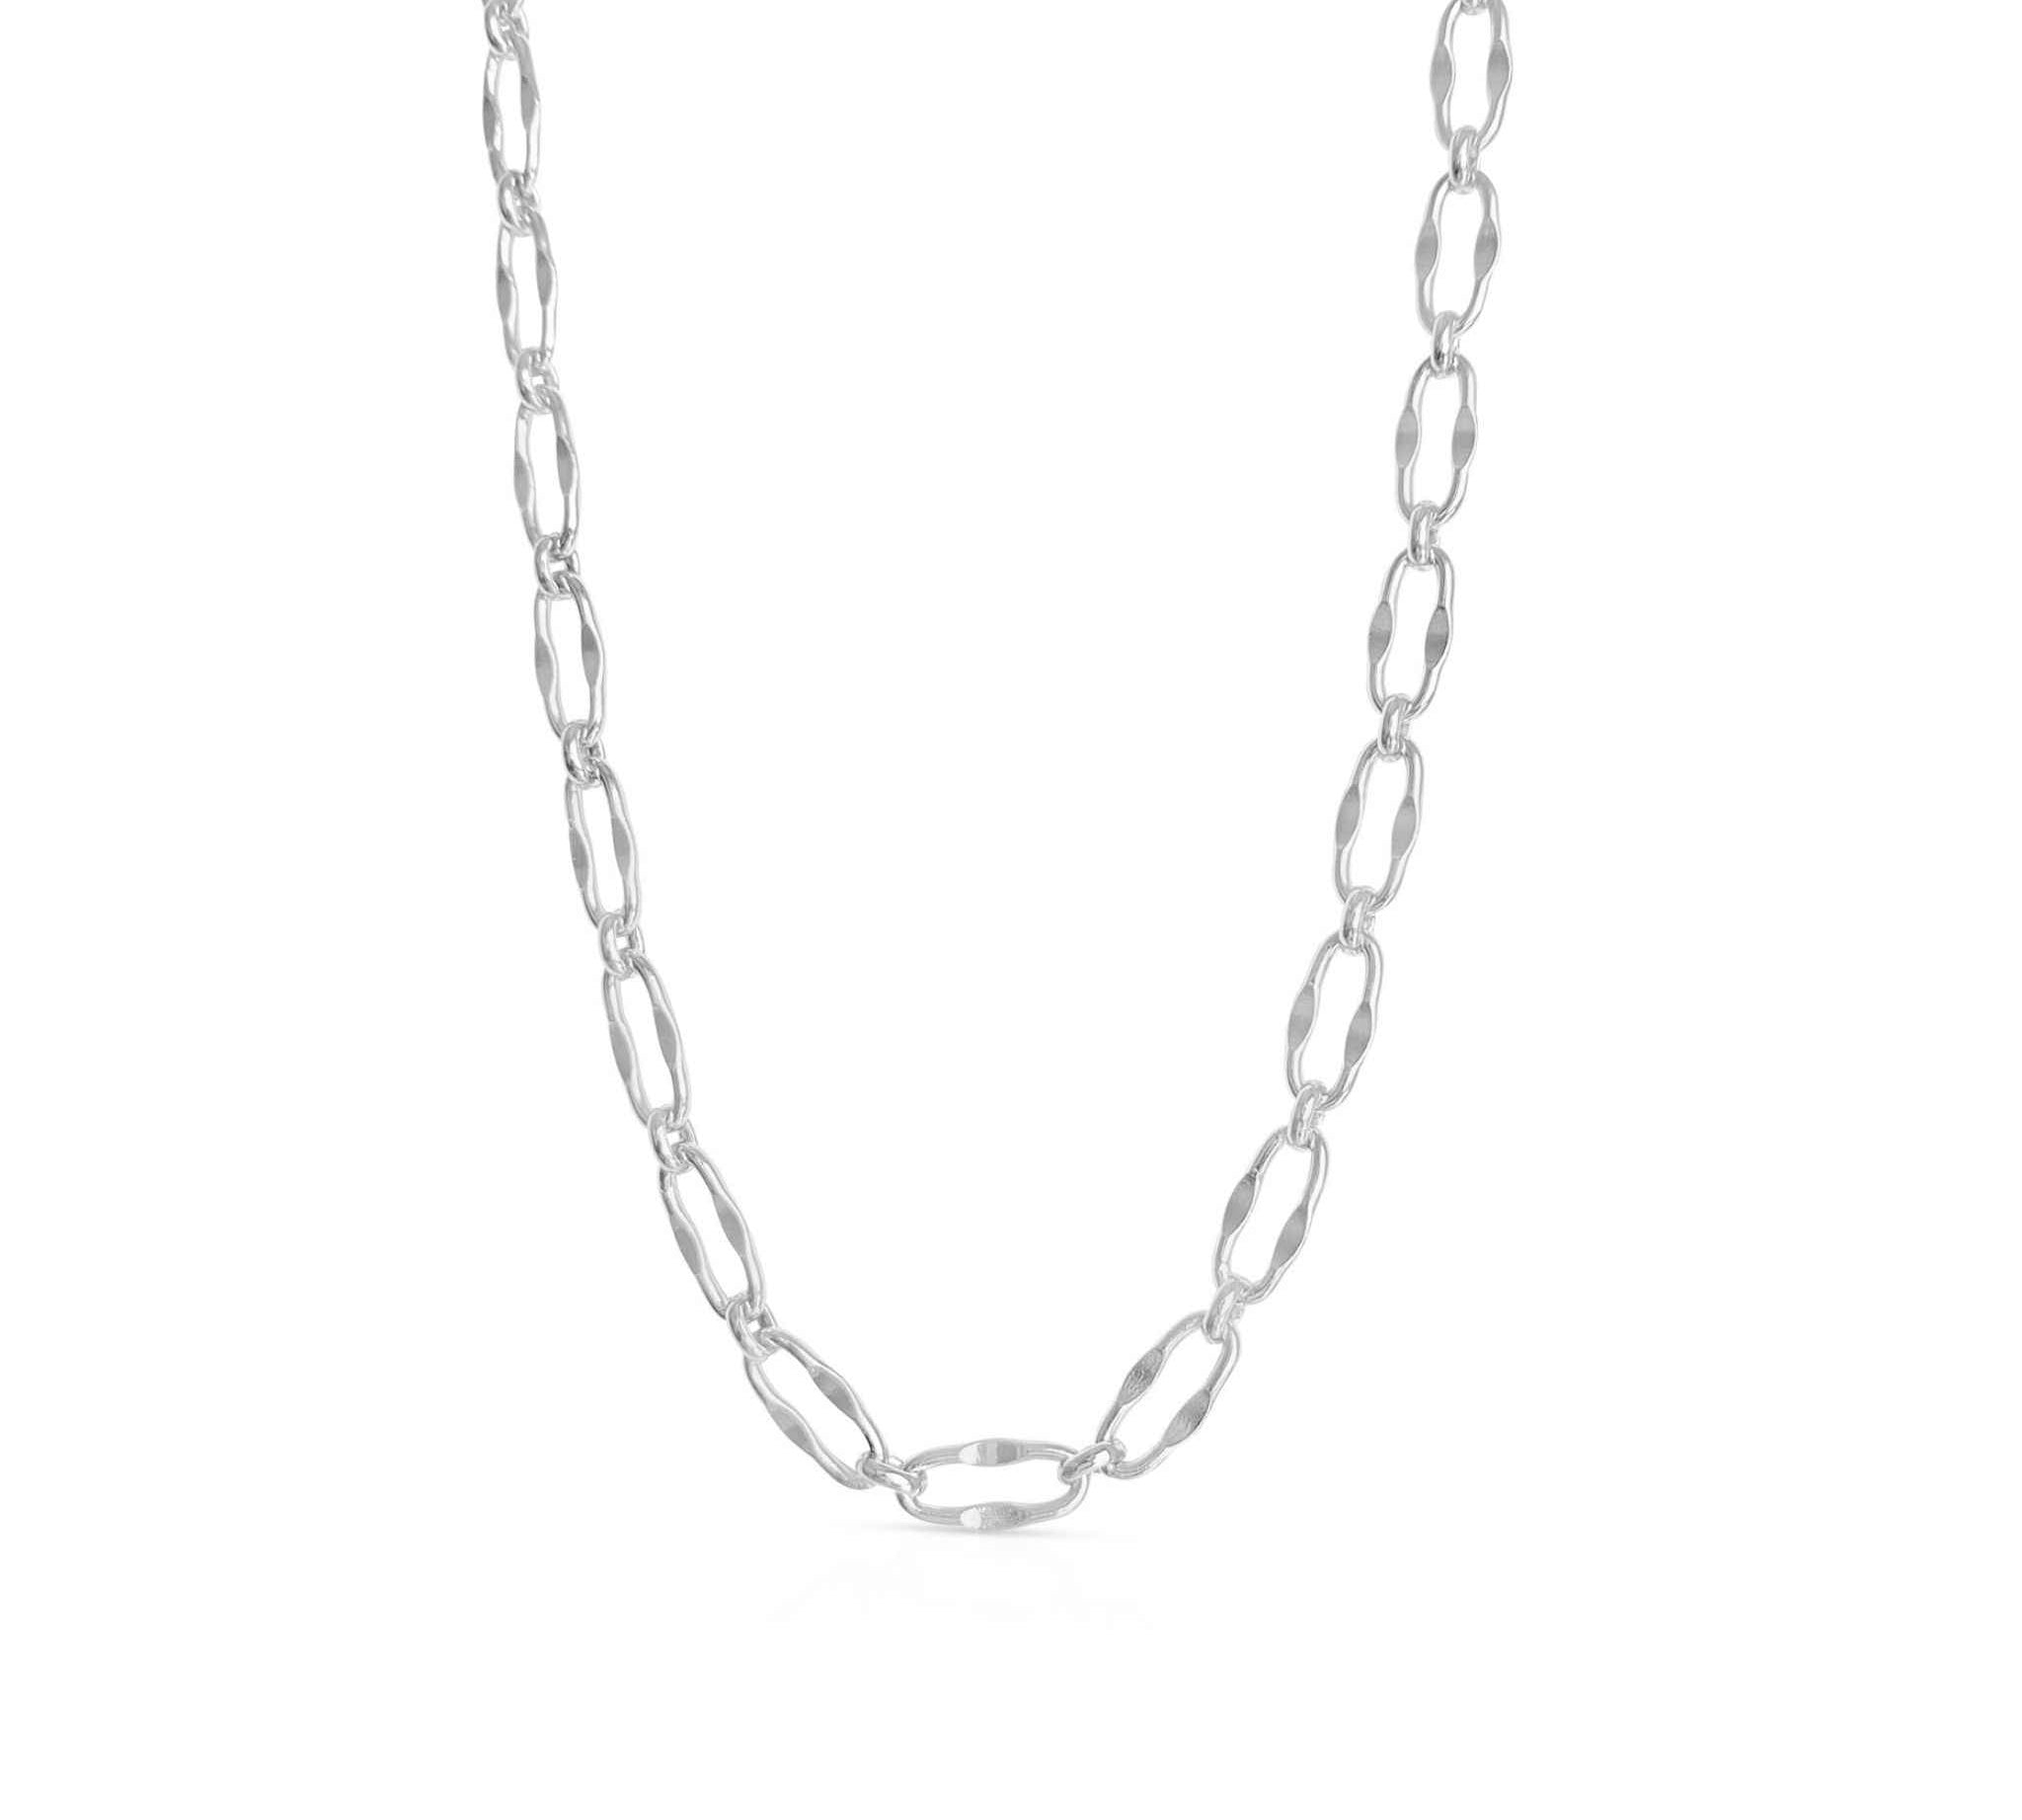 Modern T-Bar Link Necklace in sterling silver by Alessandra James, perfect for a layered look.